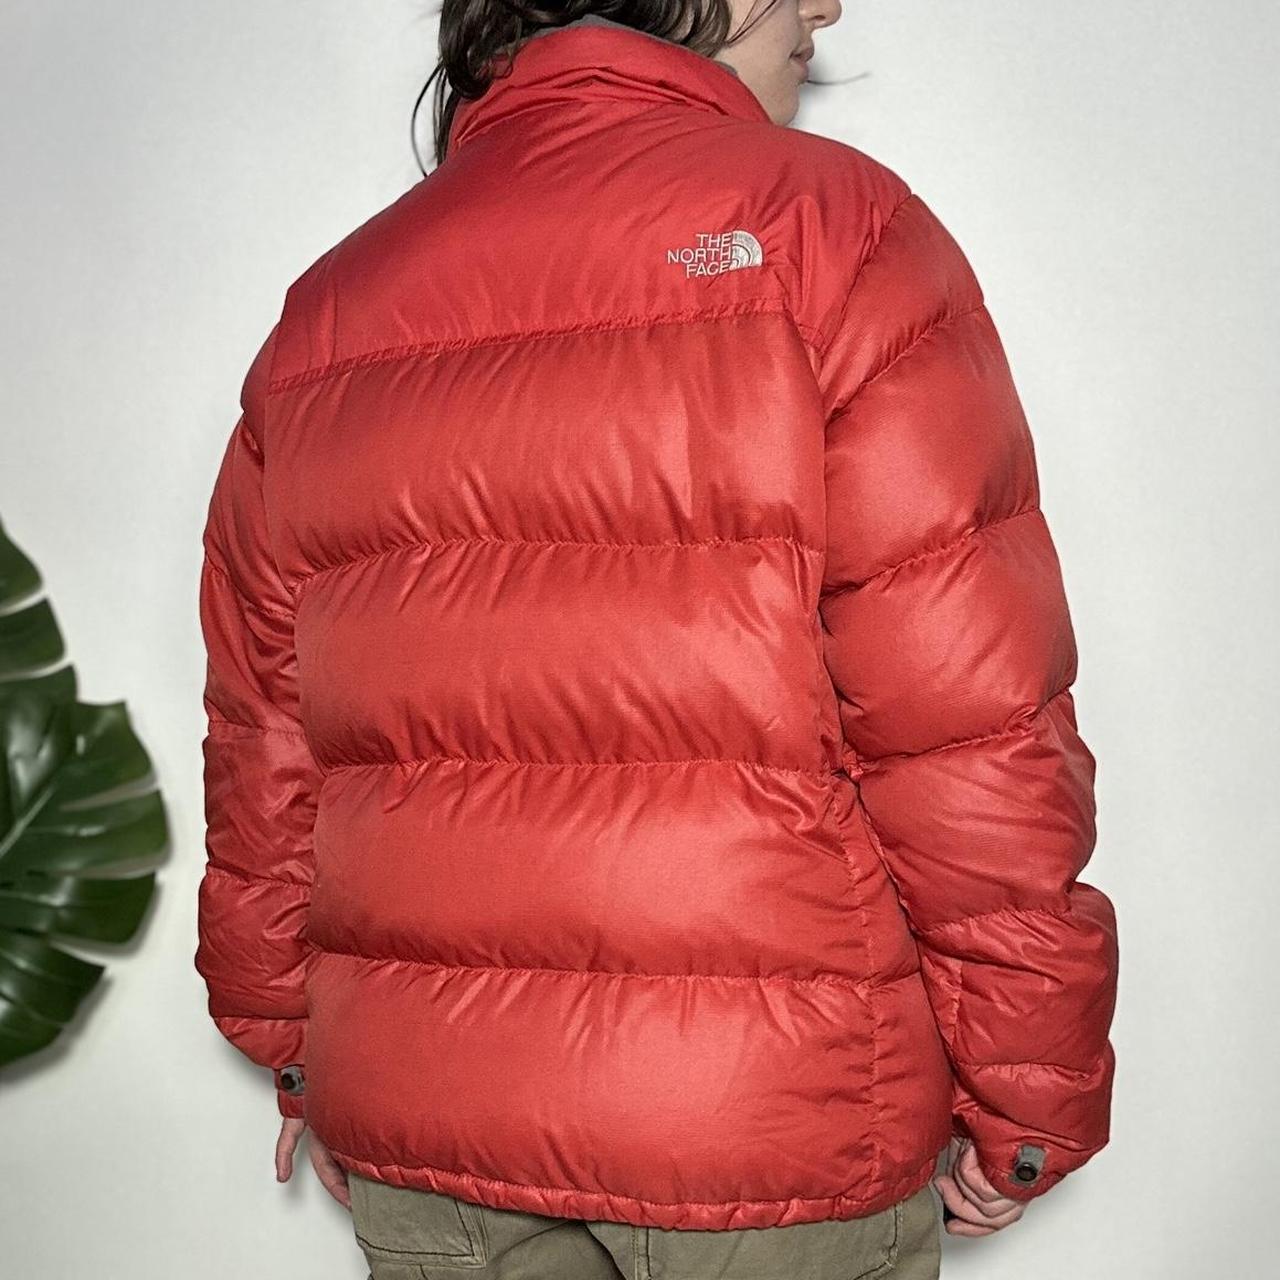 Vintage 90s The North Face 1996 Retro Nuptse 700 red puffer jacket